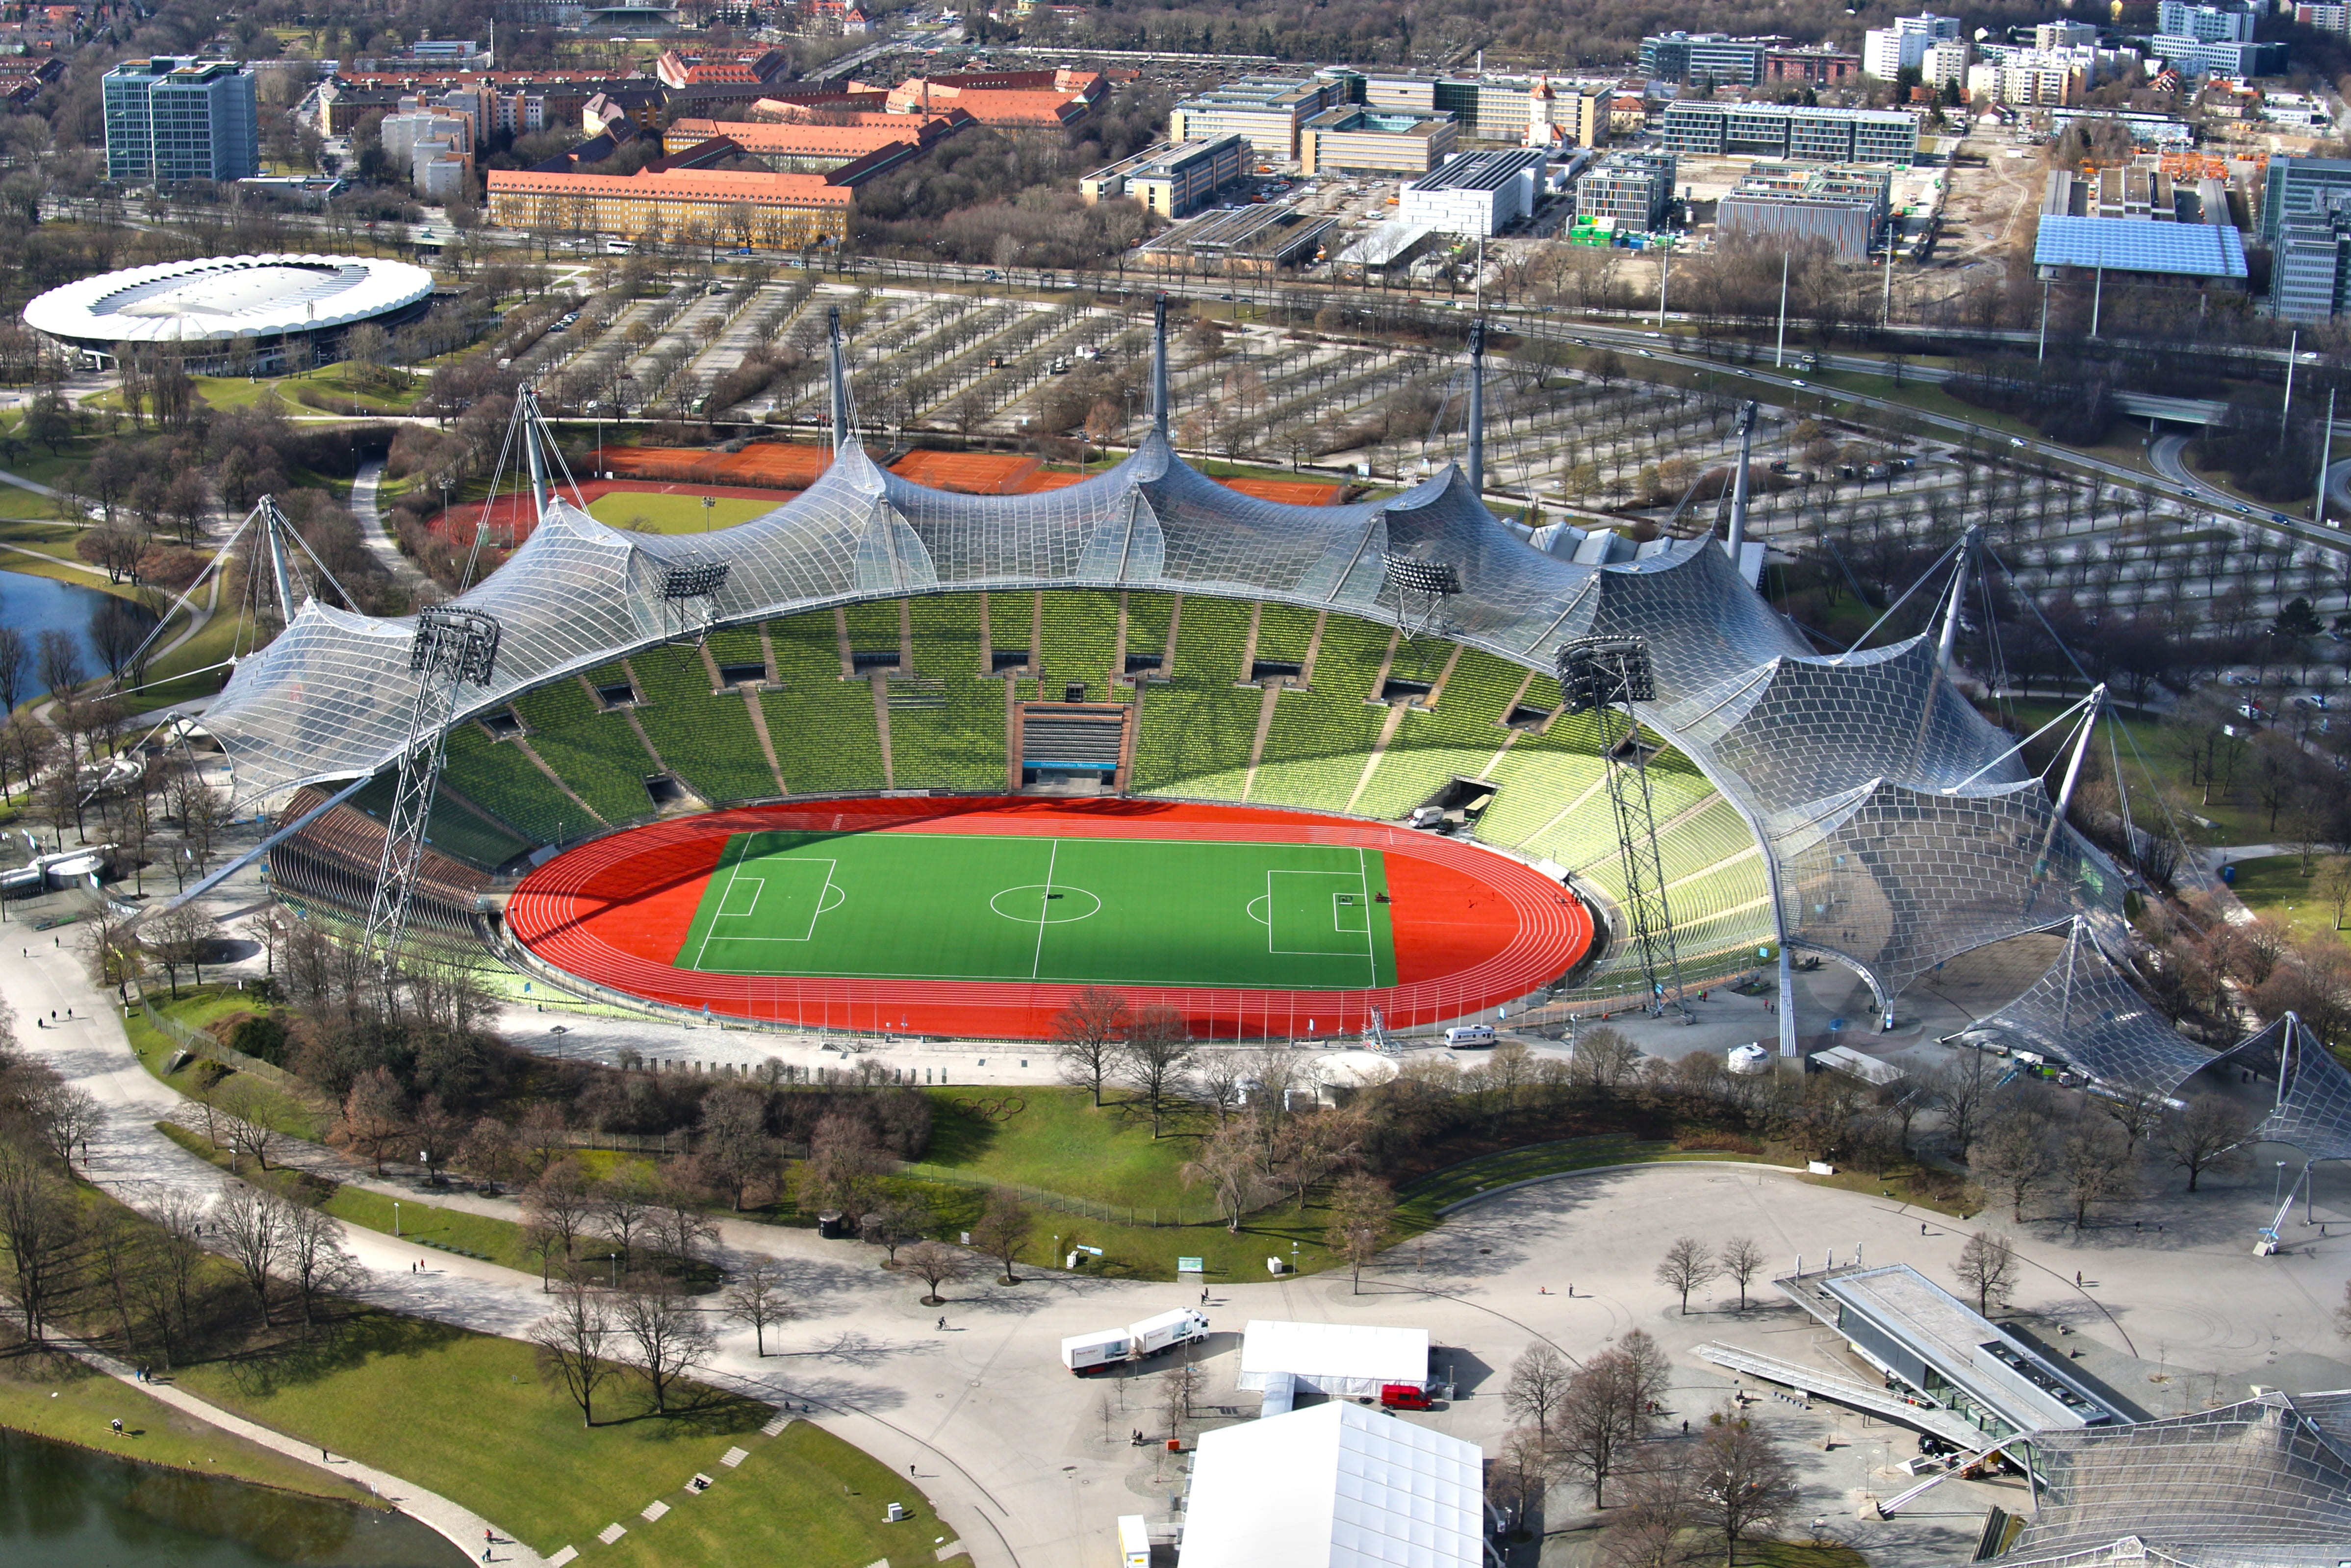 aerial view of soccer field at daytime, olympic stadium, munich